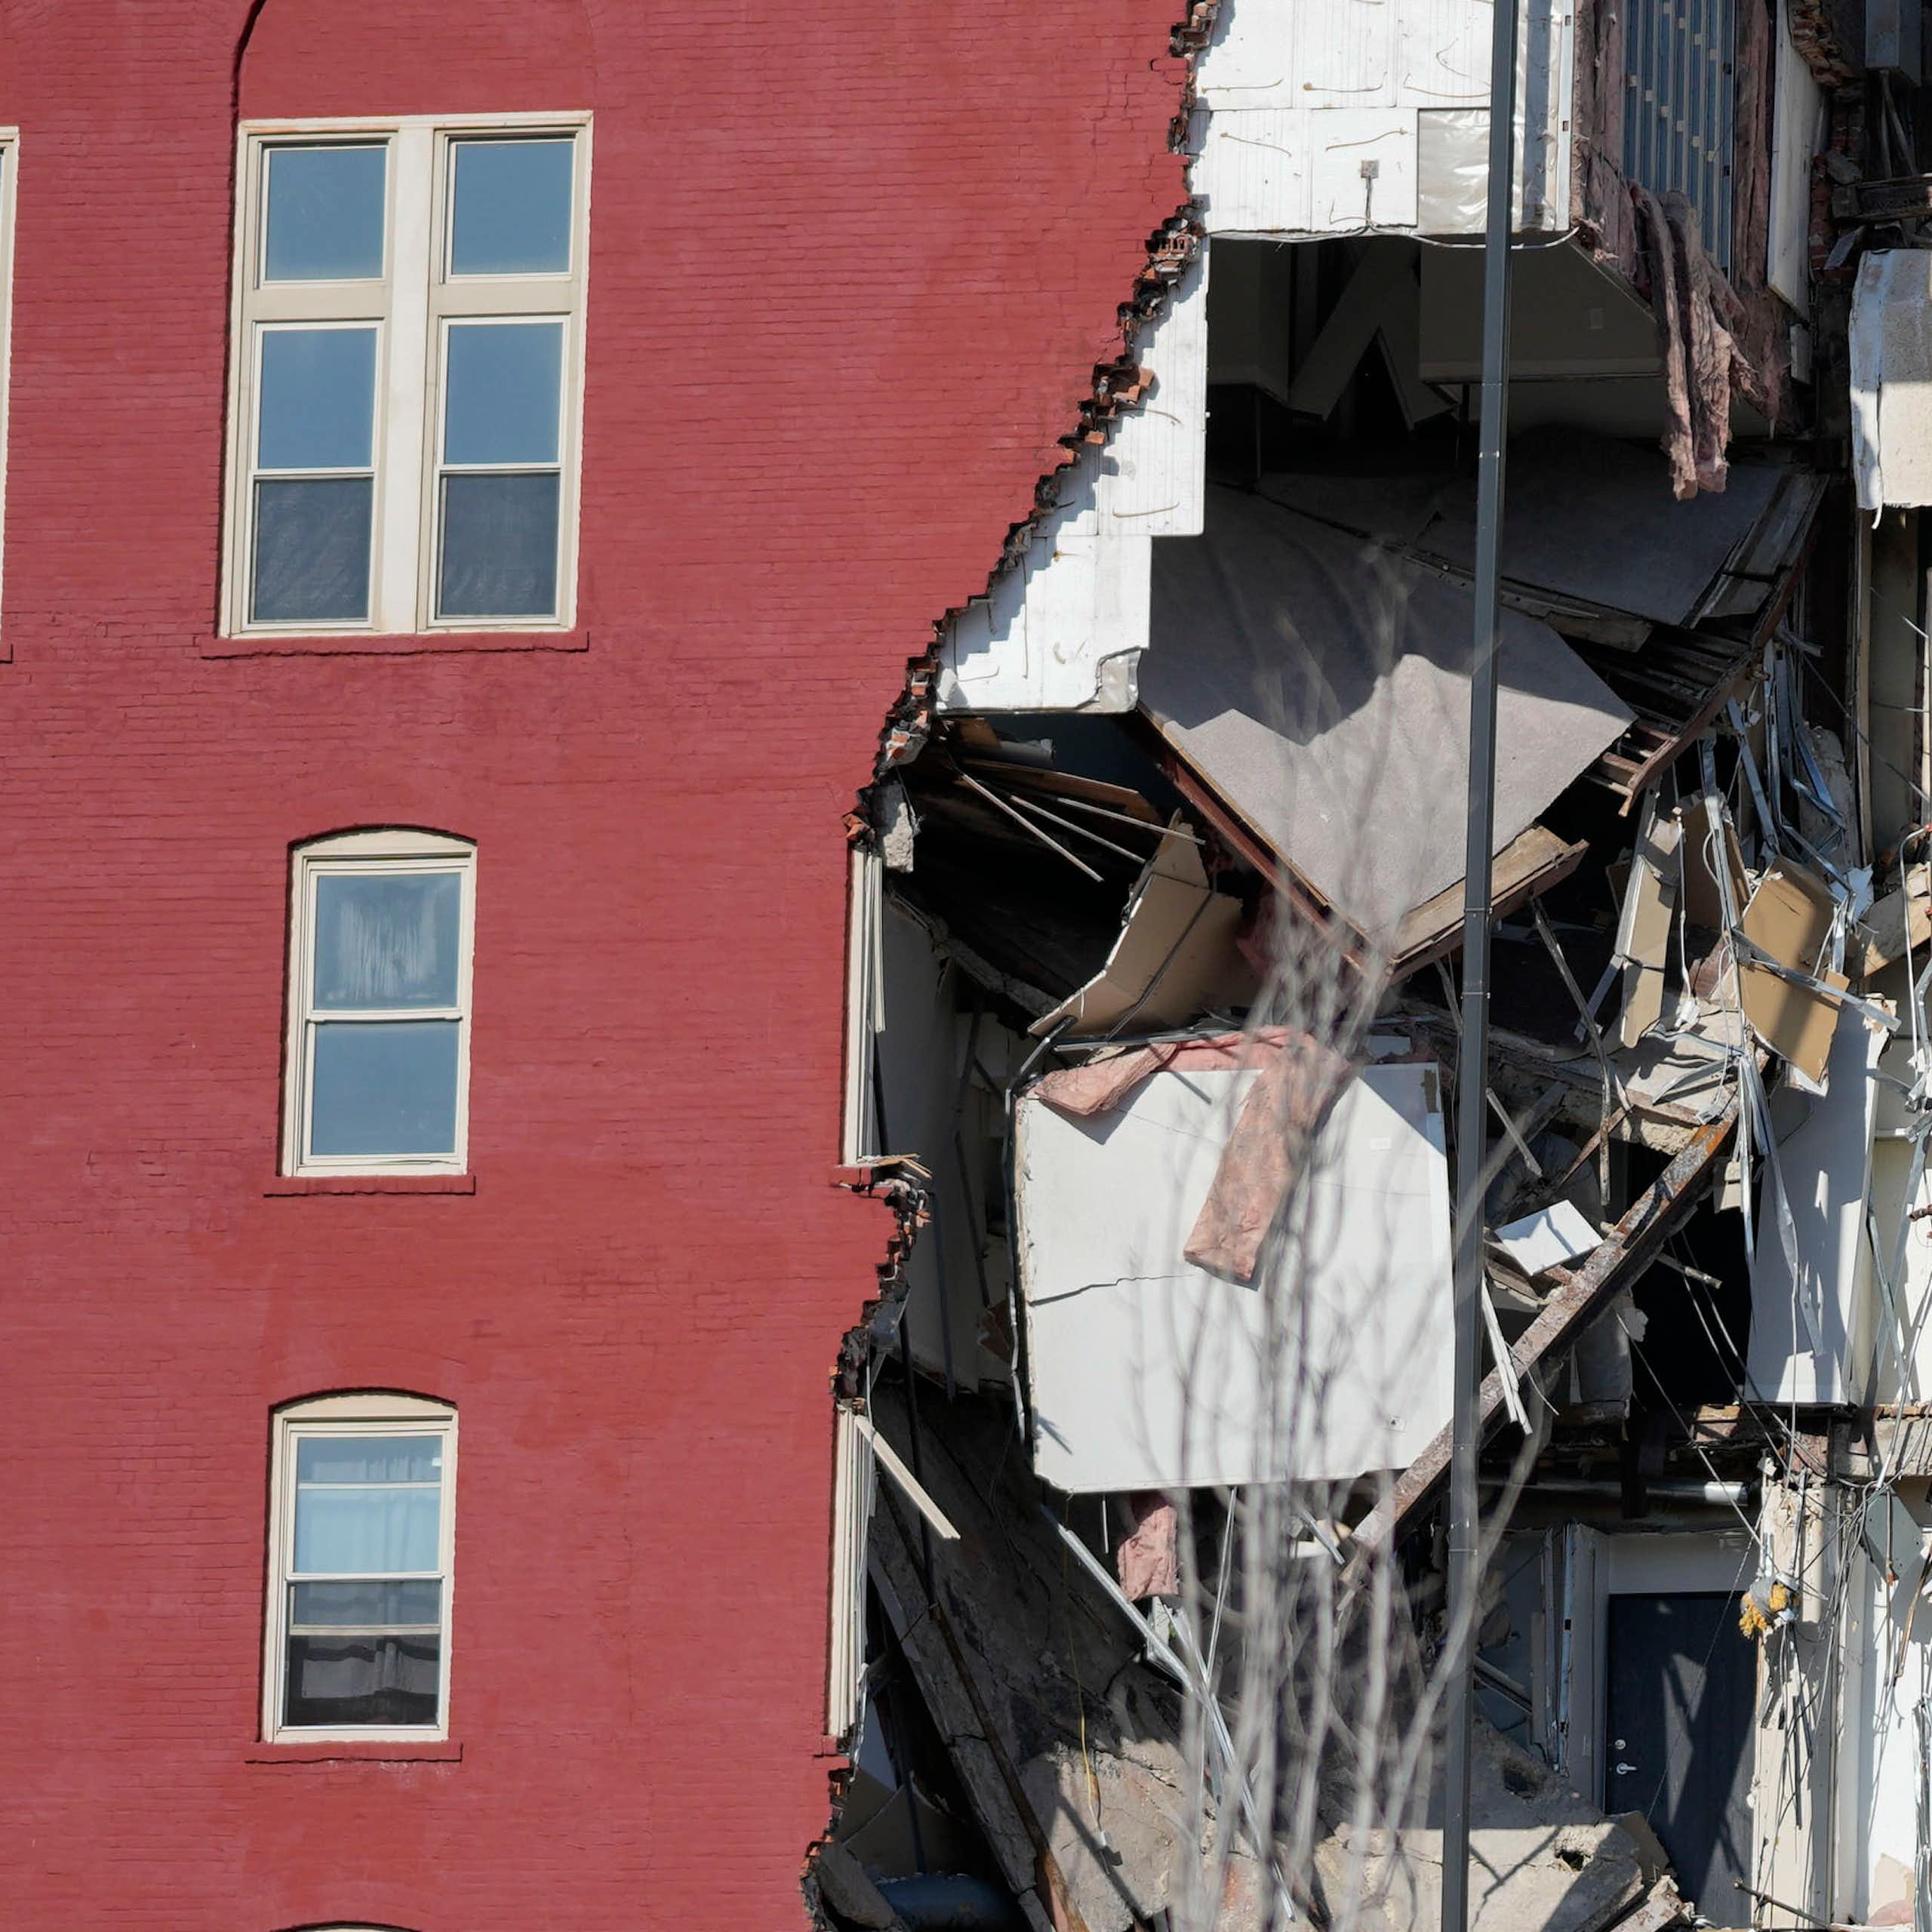 Several floors of a red brick six-story apartment building are gone. Clothing is still visible in closets.